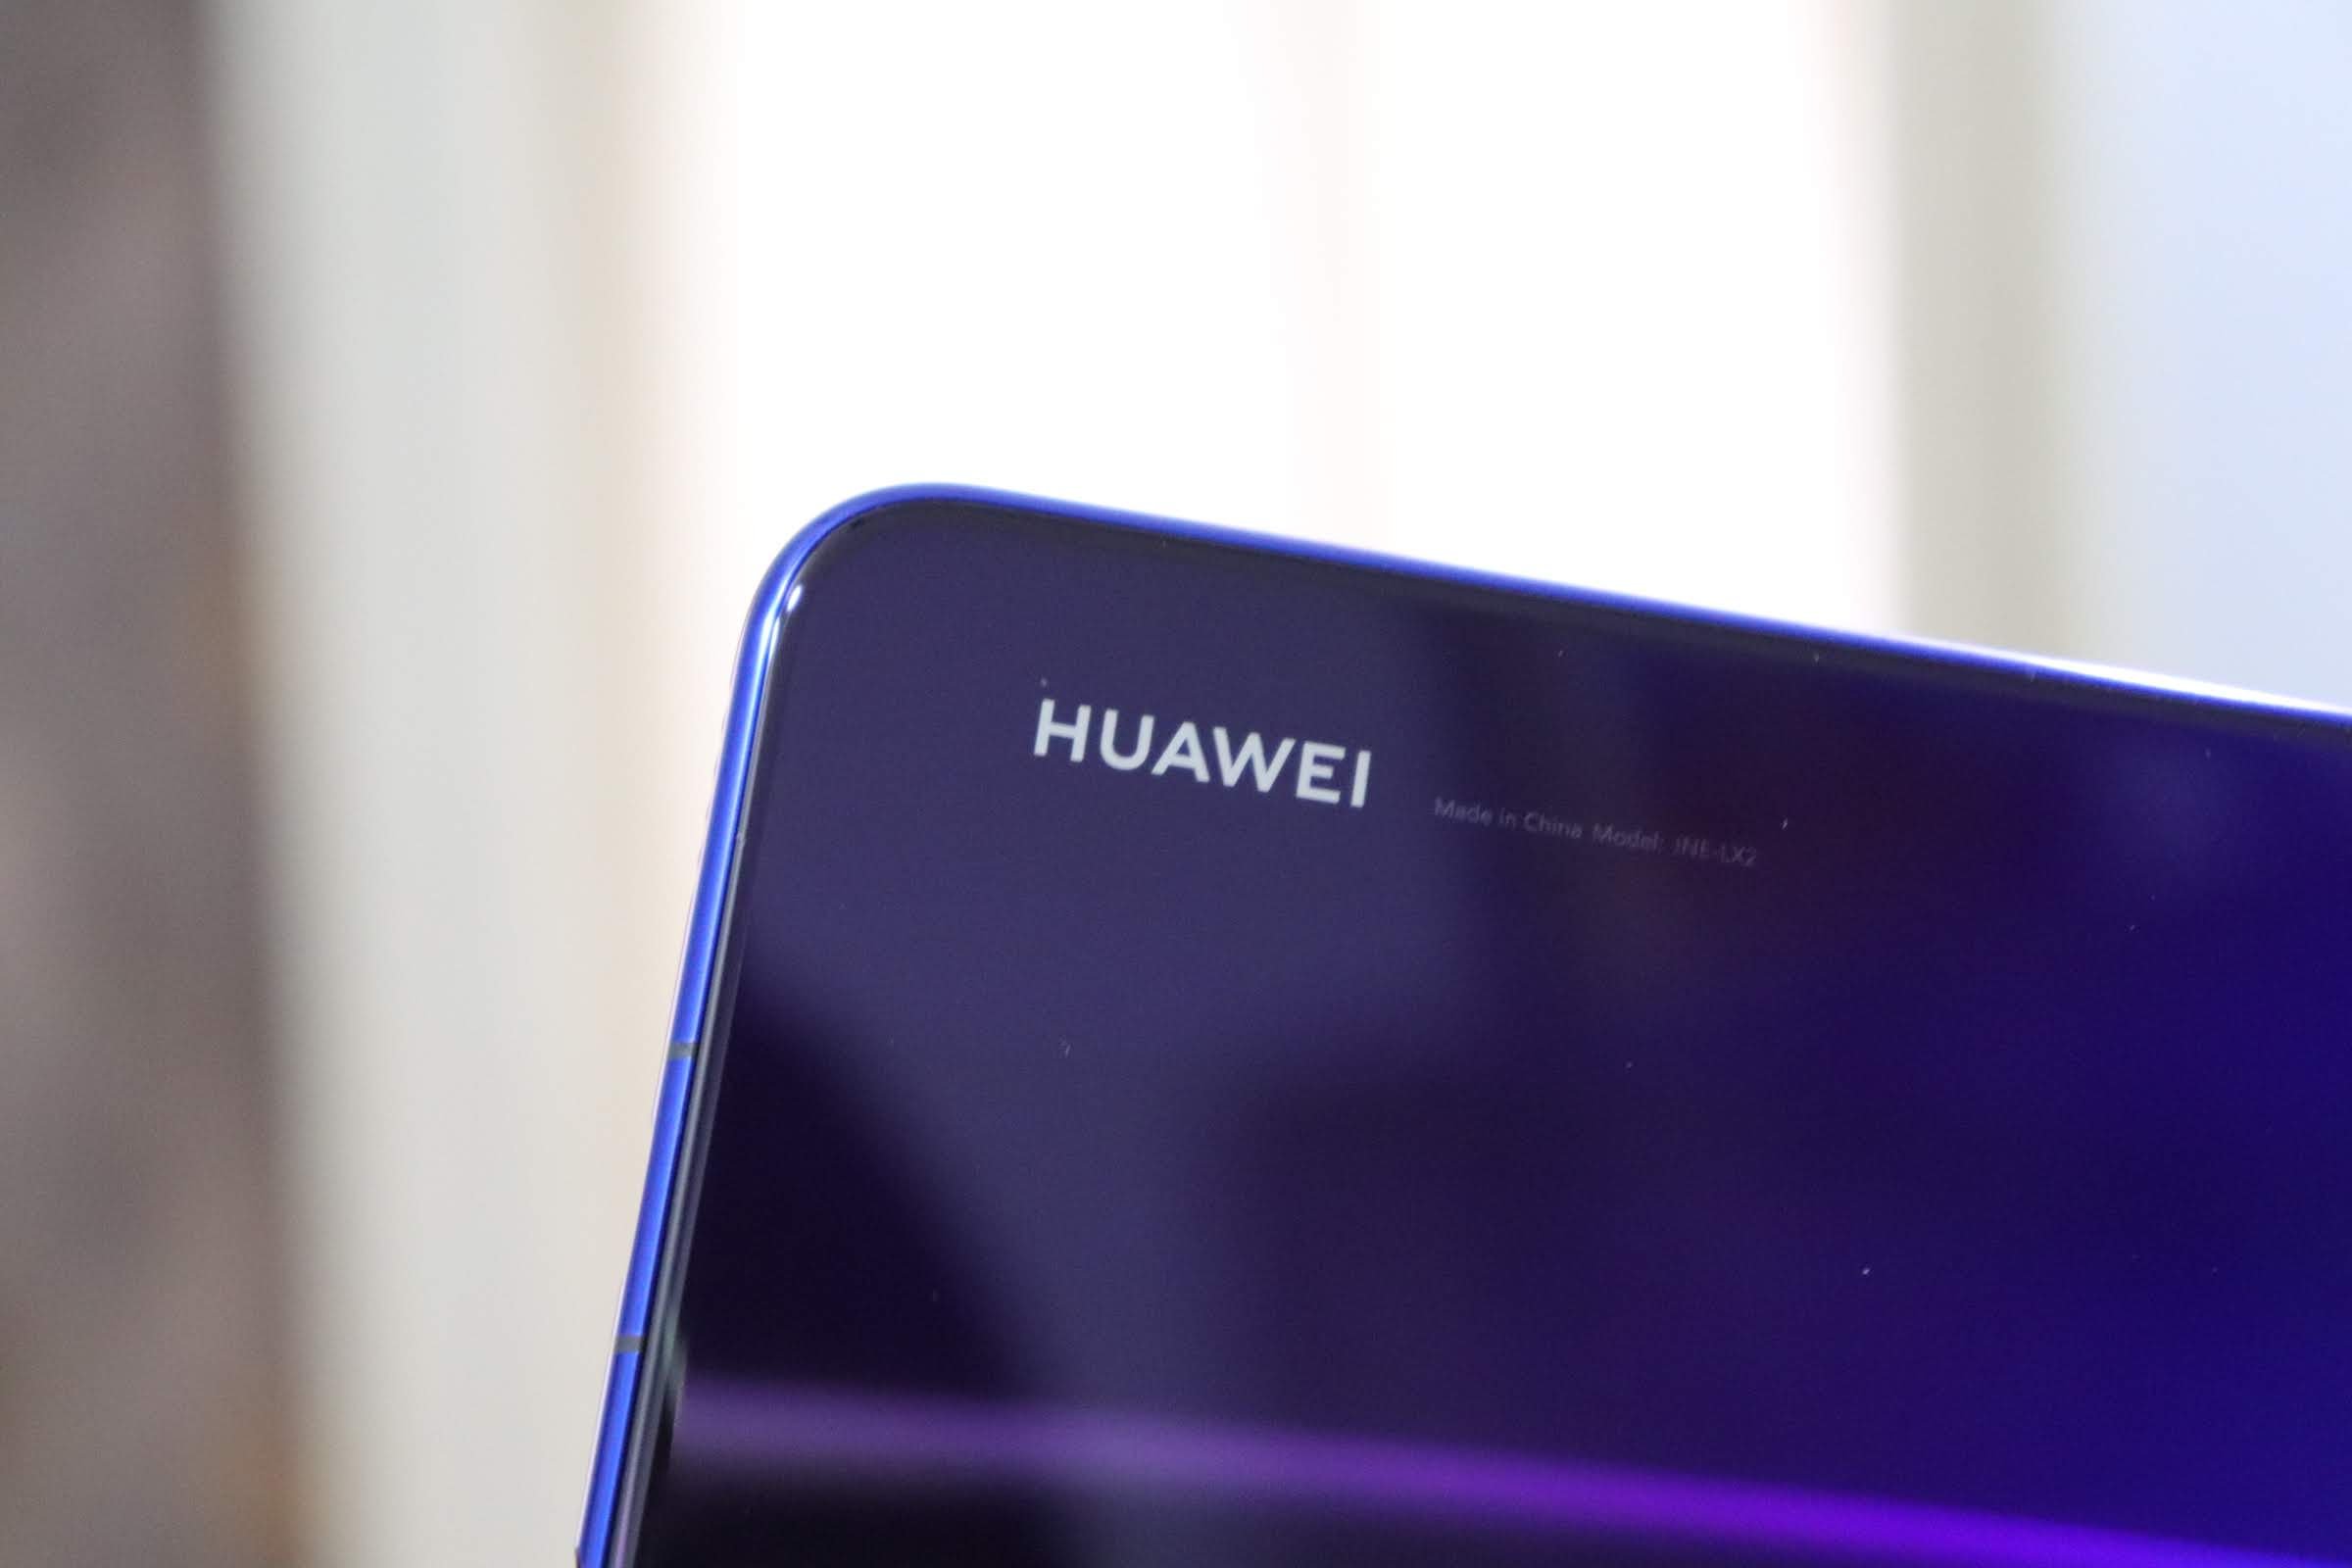 Huawei Android 10 update